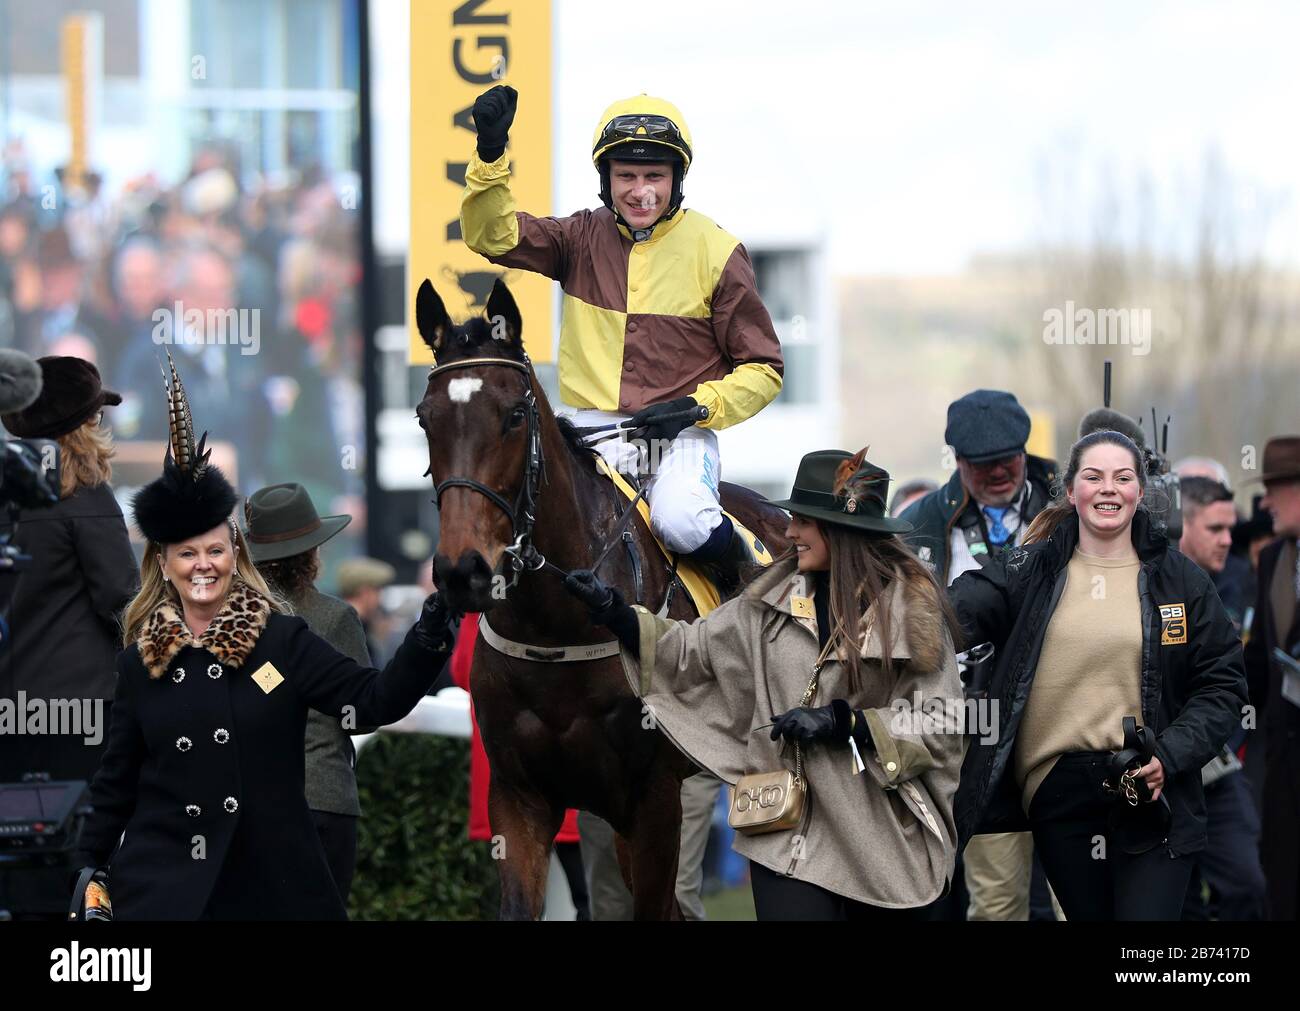 Paul Townend celebrates on Burning Victory after winning the JCB Triumph Hurdle during day four of the Cheltenham Festival at Cheltenham Racecourse. Stock Photo